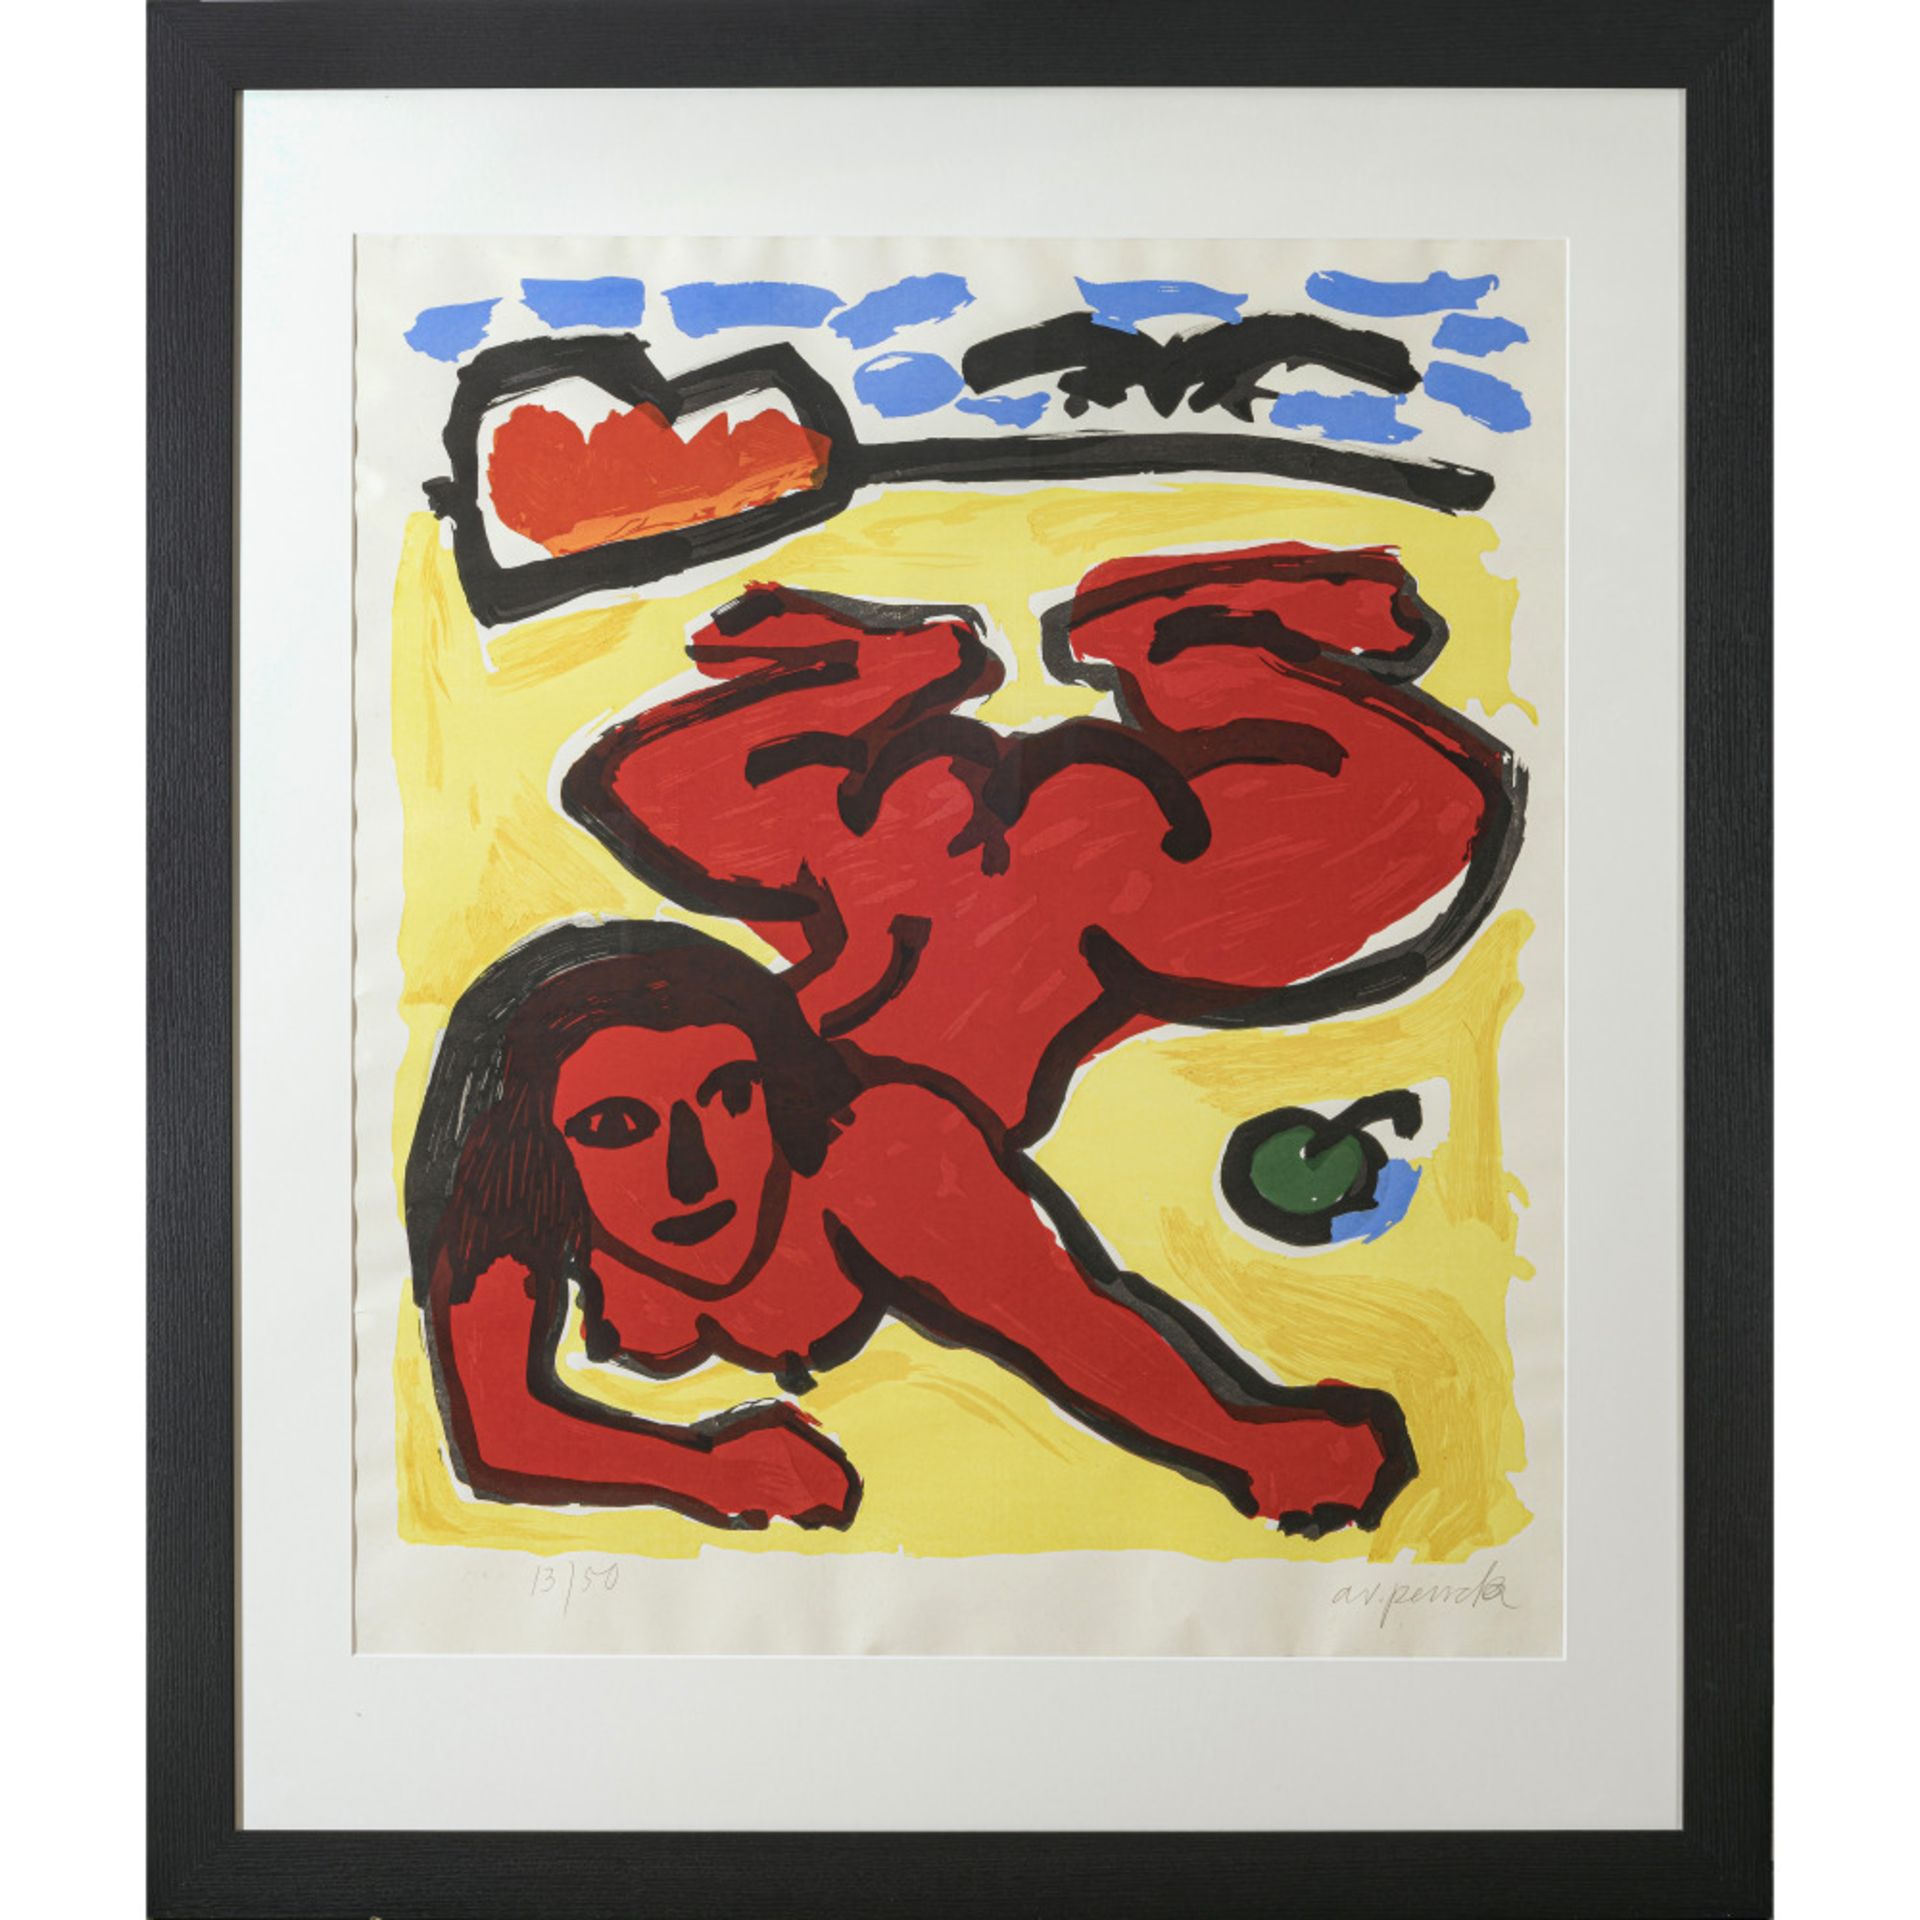 A.R. Penck - Lying woman in red - Image 2 of 2